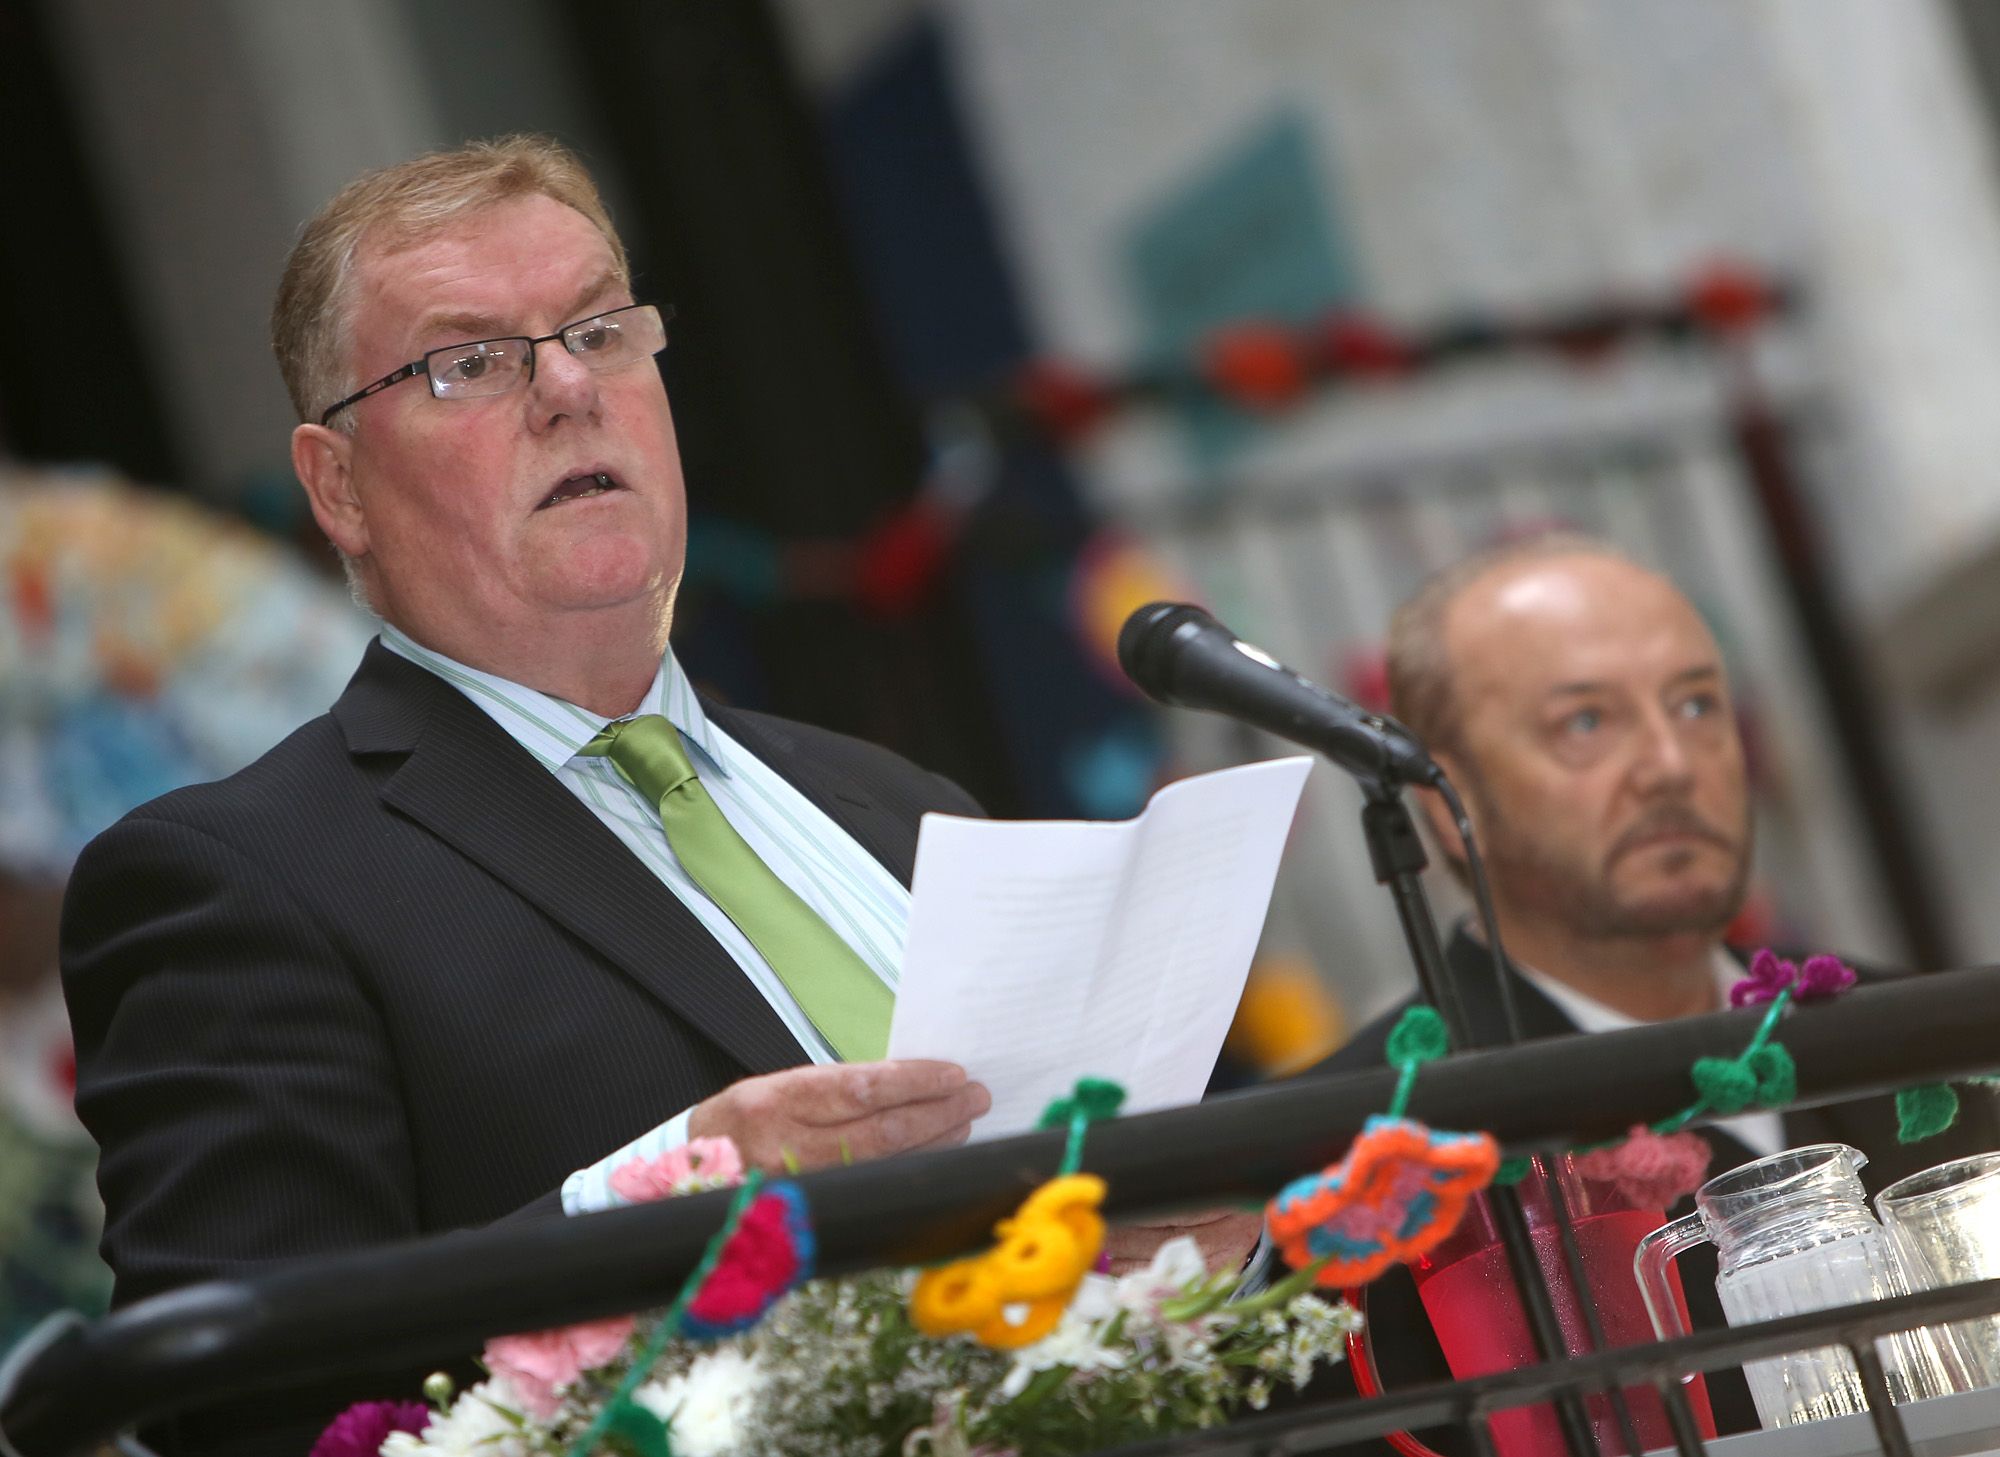 COMMUNITY JUSTICE CAMPAIGNER: Harry Maguire introduces George Galloway at the Frank Cahill lecture during the 2013 Féile an Phobail